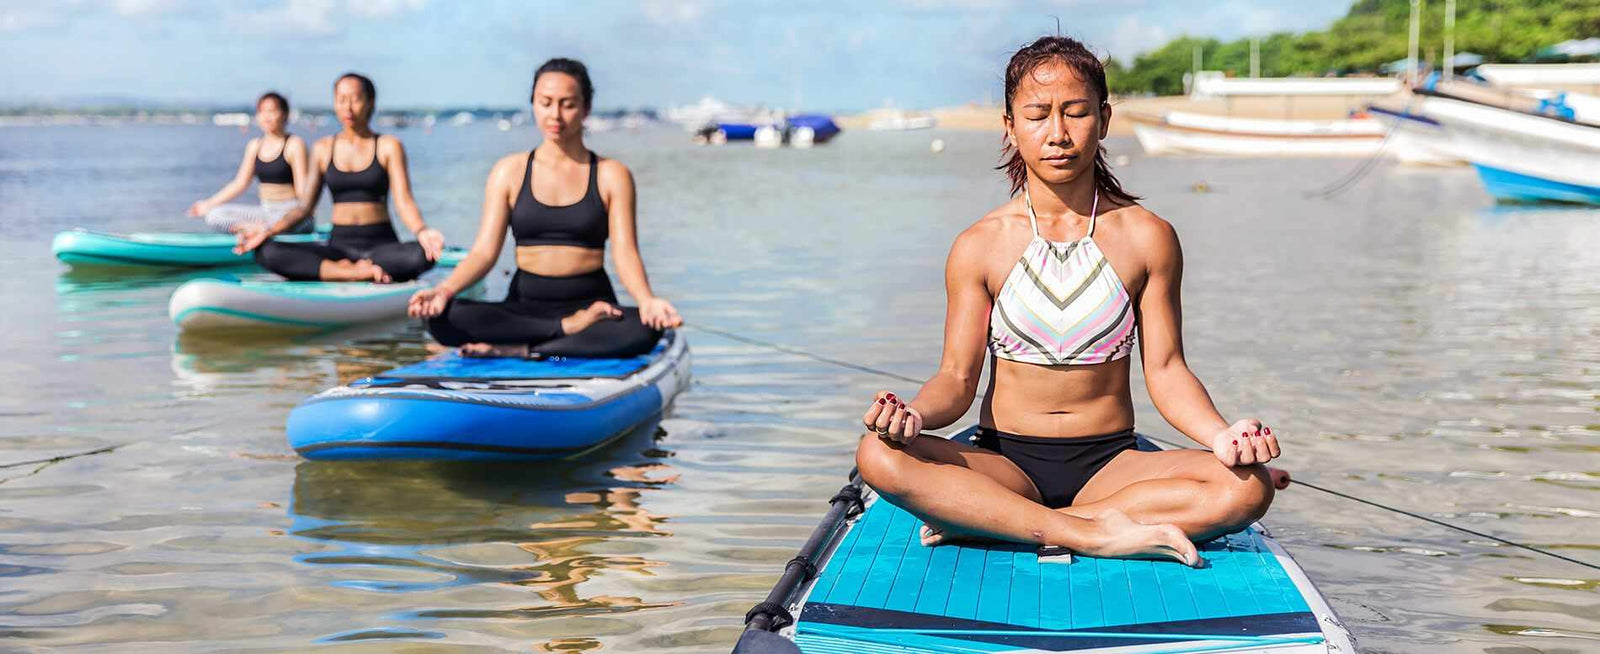 12 Paddle Board Yoga Poses You Can Do Now (with pictures) - GILI Sports